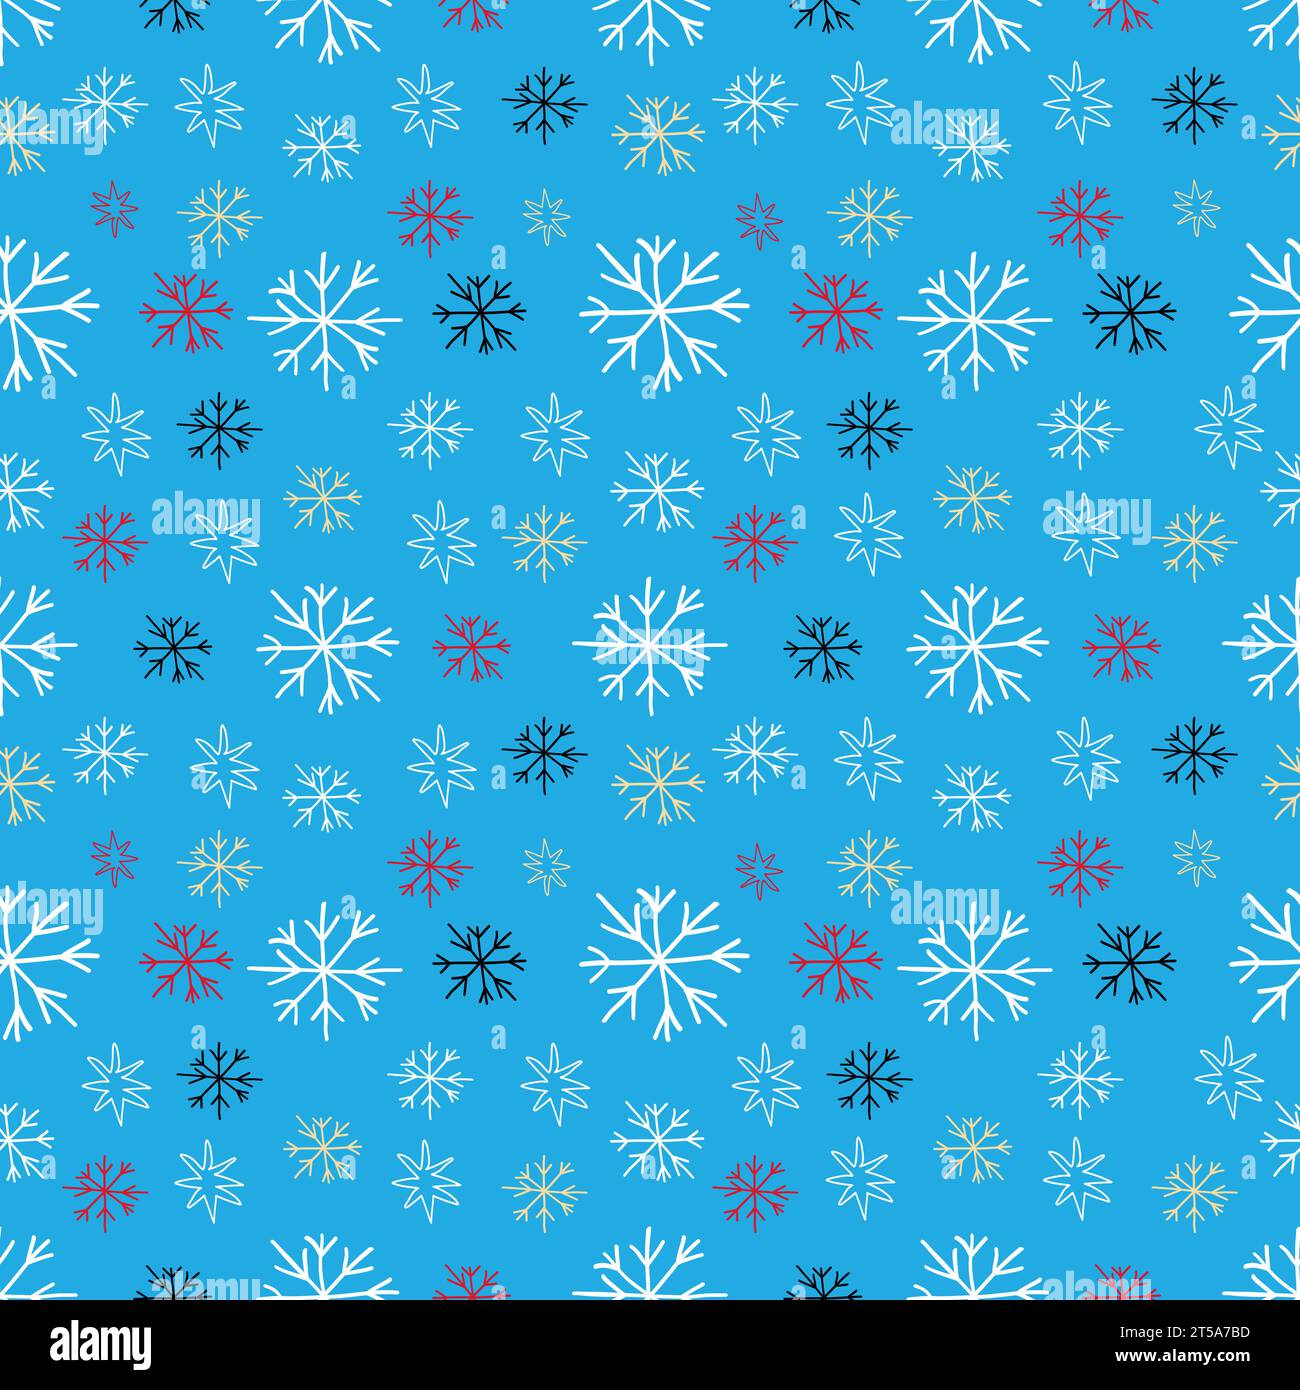 Blue seamless pattern with white snowflakes of different sizes on blue background Stock Vector